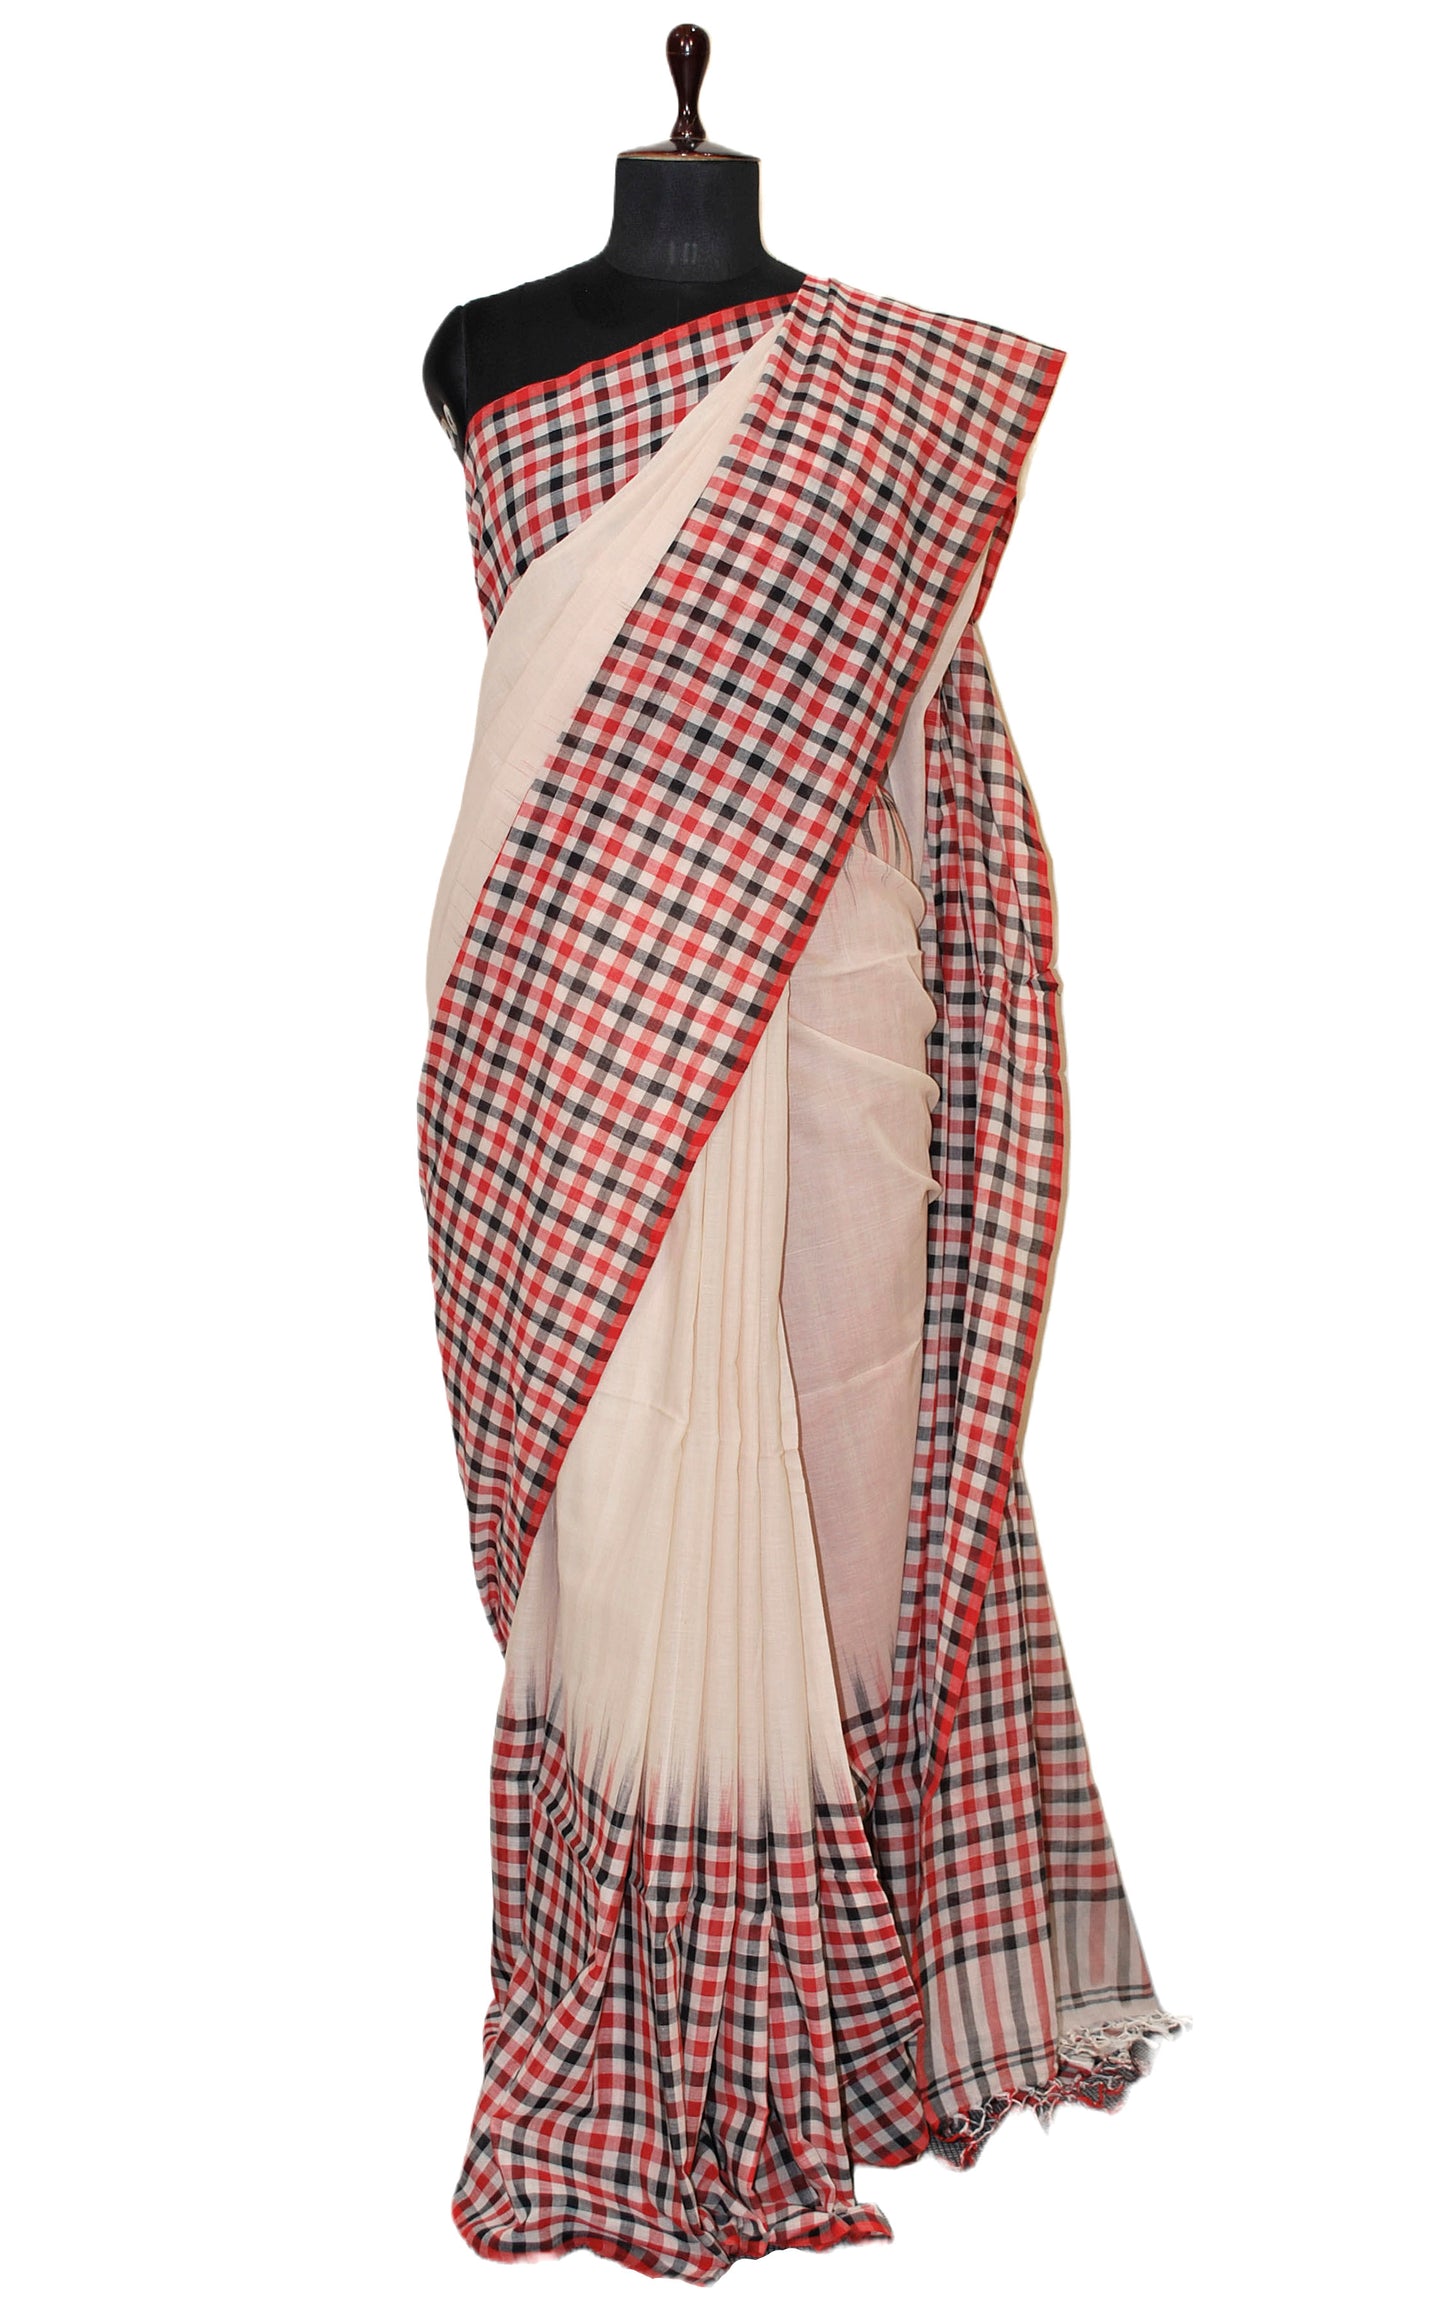 Skirt Border Micro Checks Soft Cotton Saree in Parchment White, Red and Black